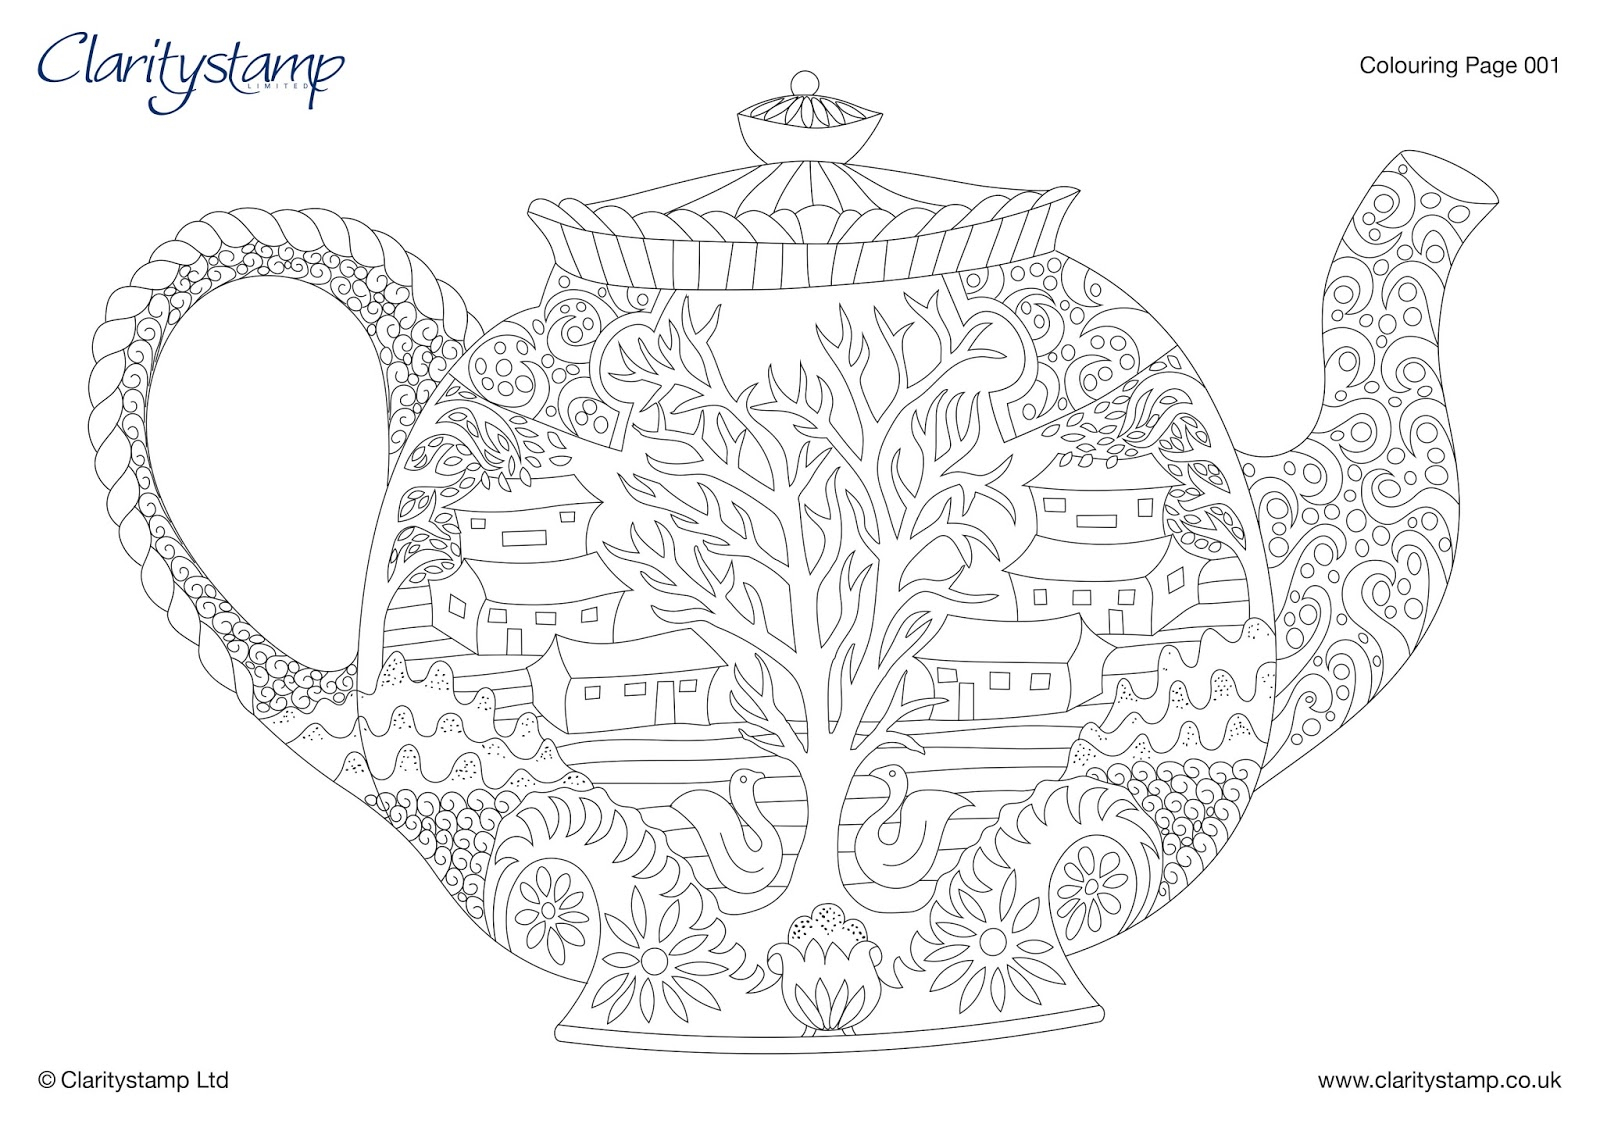 Teacup Coloring Pages To Print Free Teapot Coloring Book Download Free Clip Art Free Clip Art On